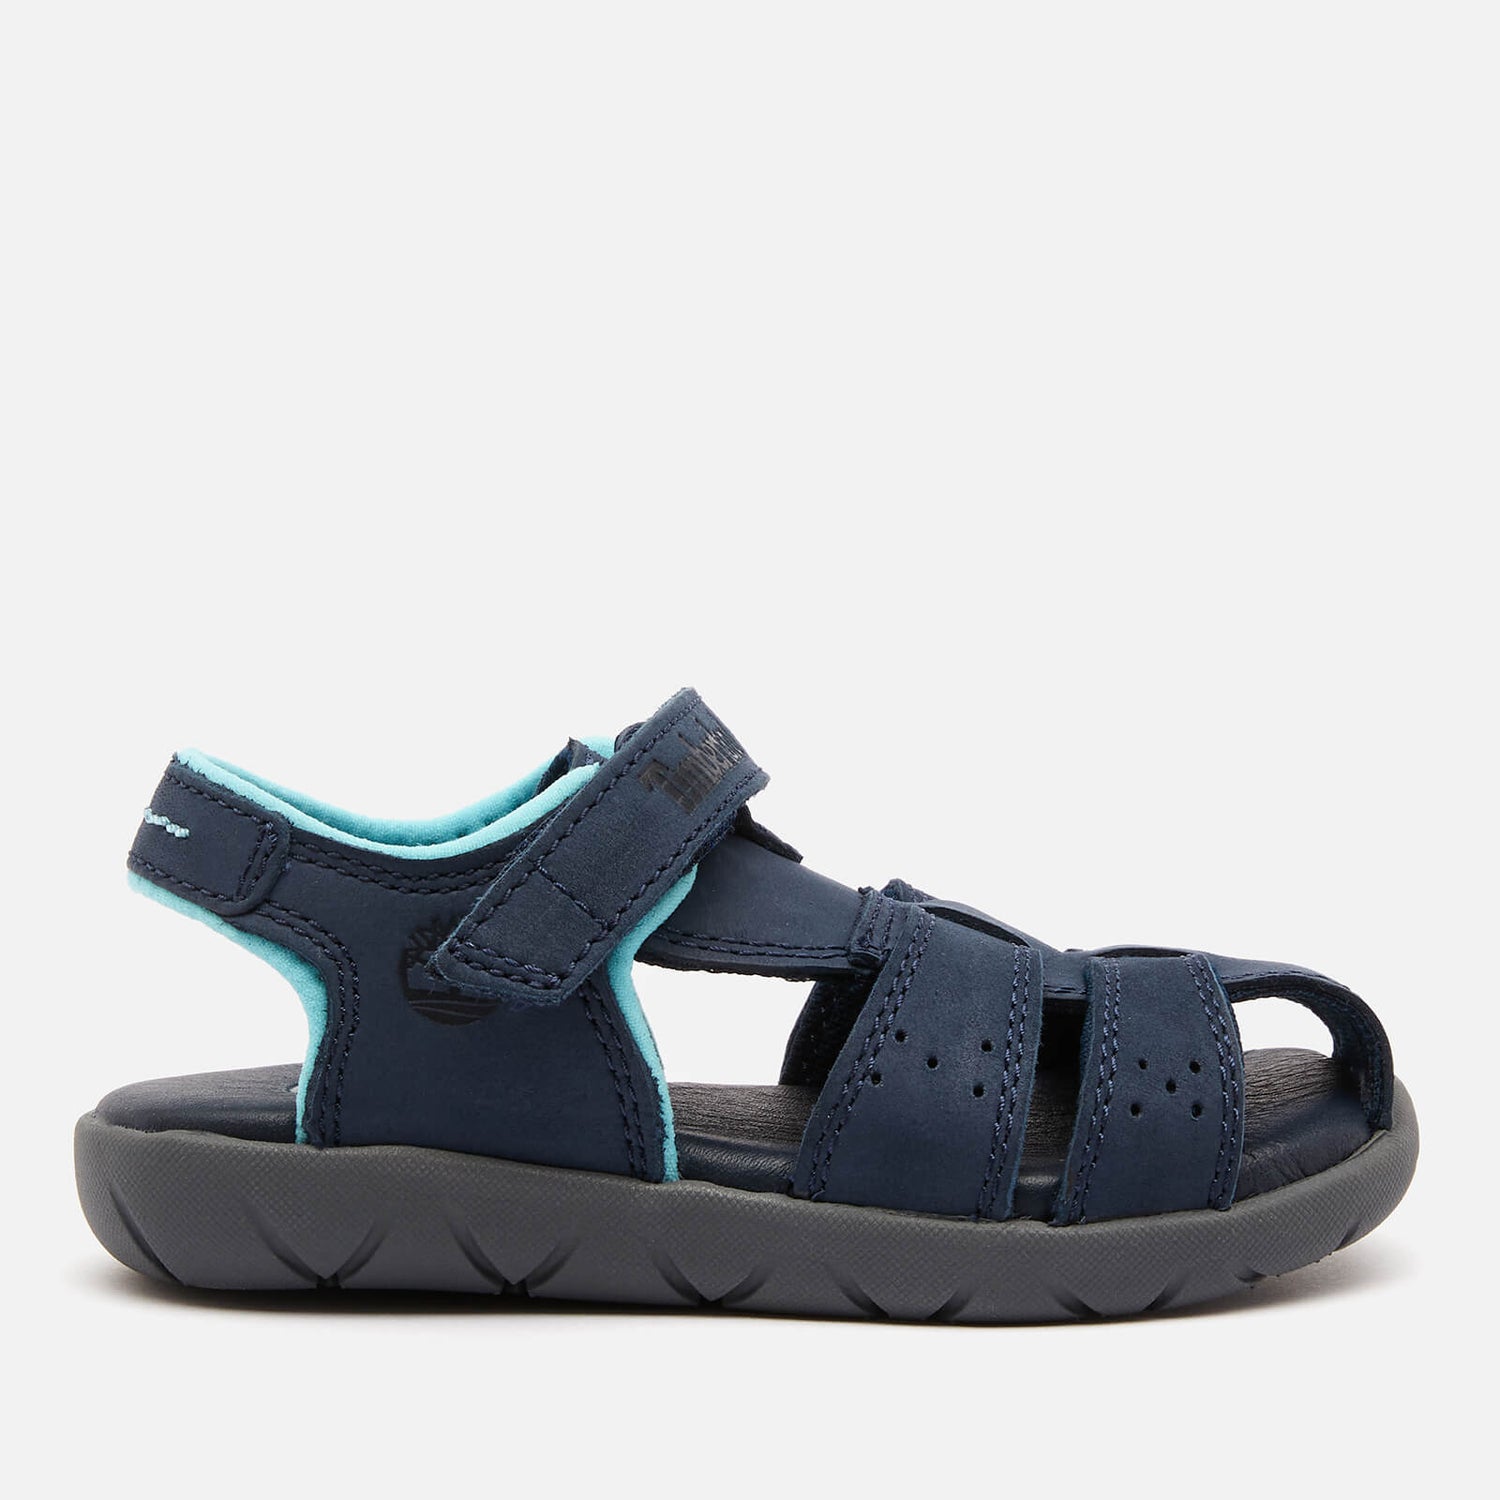 Timberland Toddlers' Nubble Leather Fisherman Sandals - Navy Nubuck